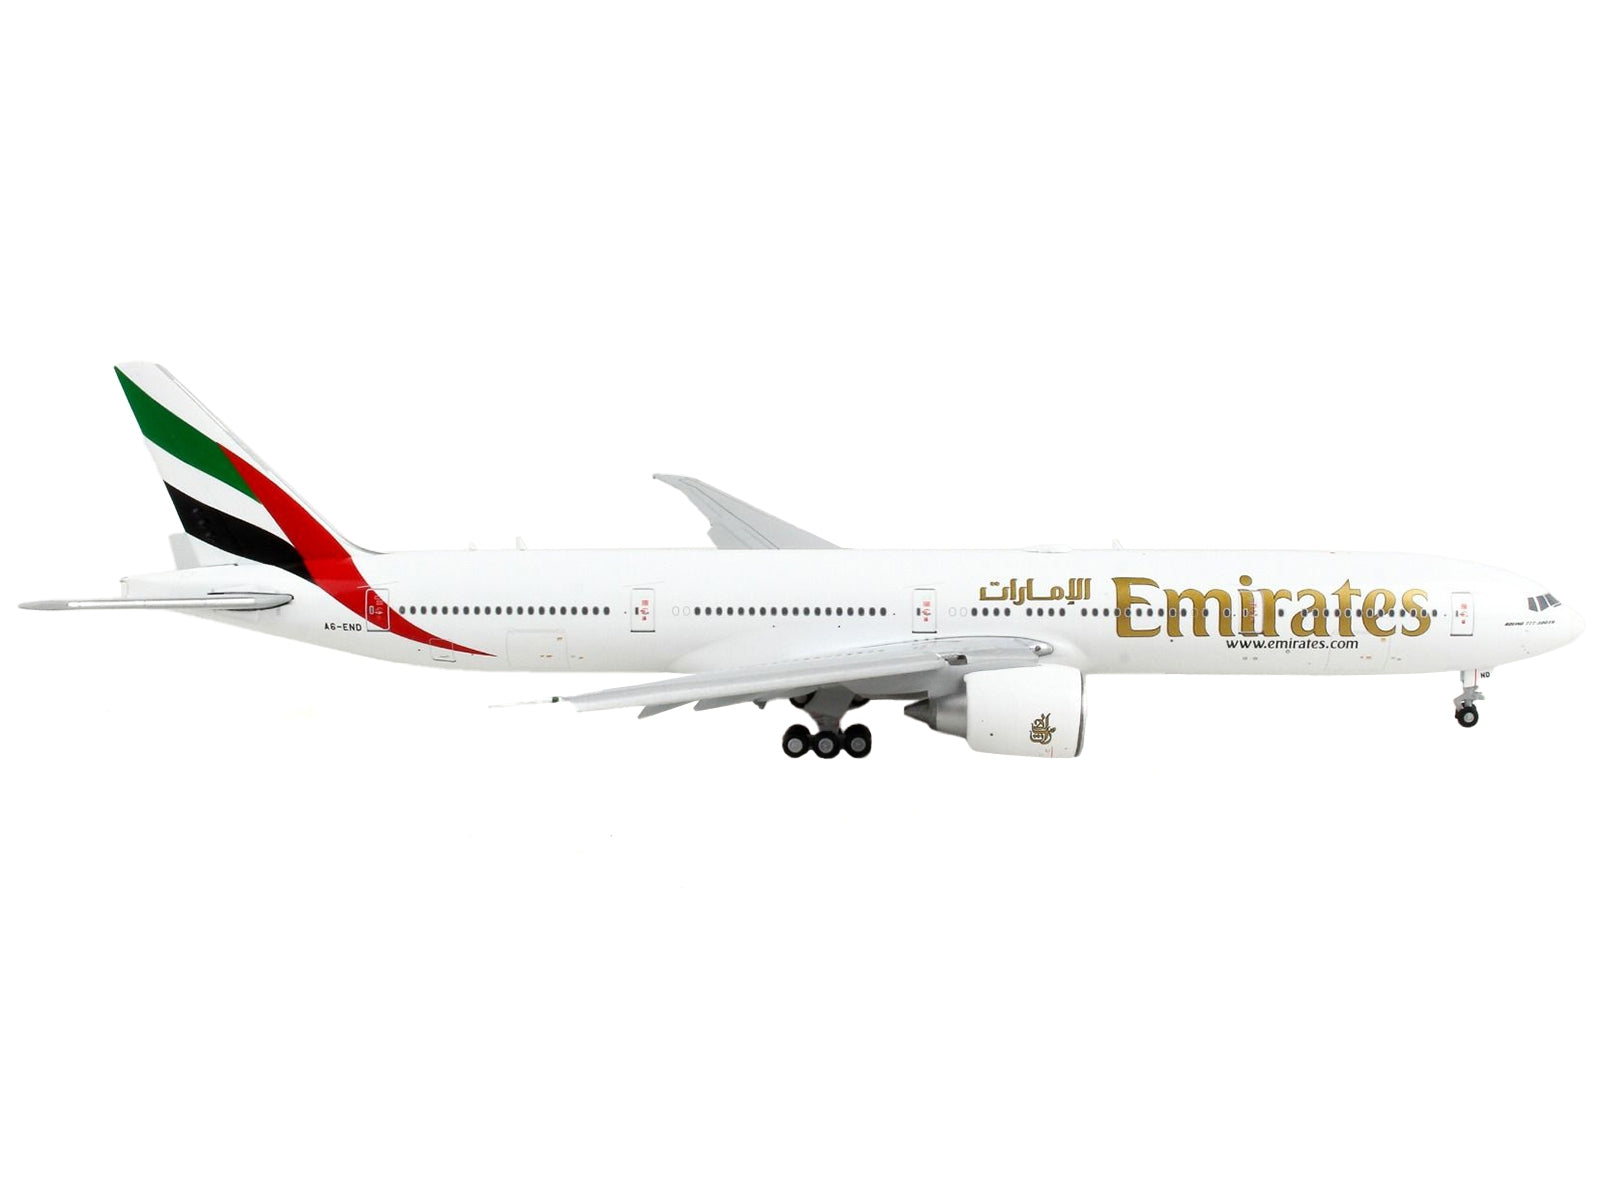 Boeing 777-300ER Commercial Aircraft with Flaps Down "Emirates Airlines" White with Striped Tail 1/400 Diecast Model Airplane by GeminiJets